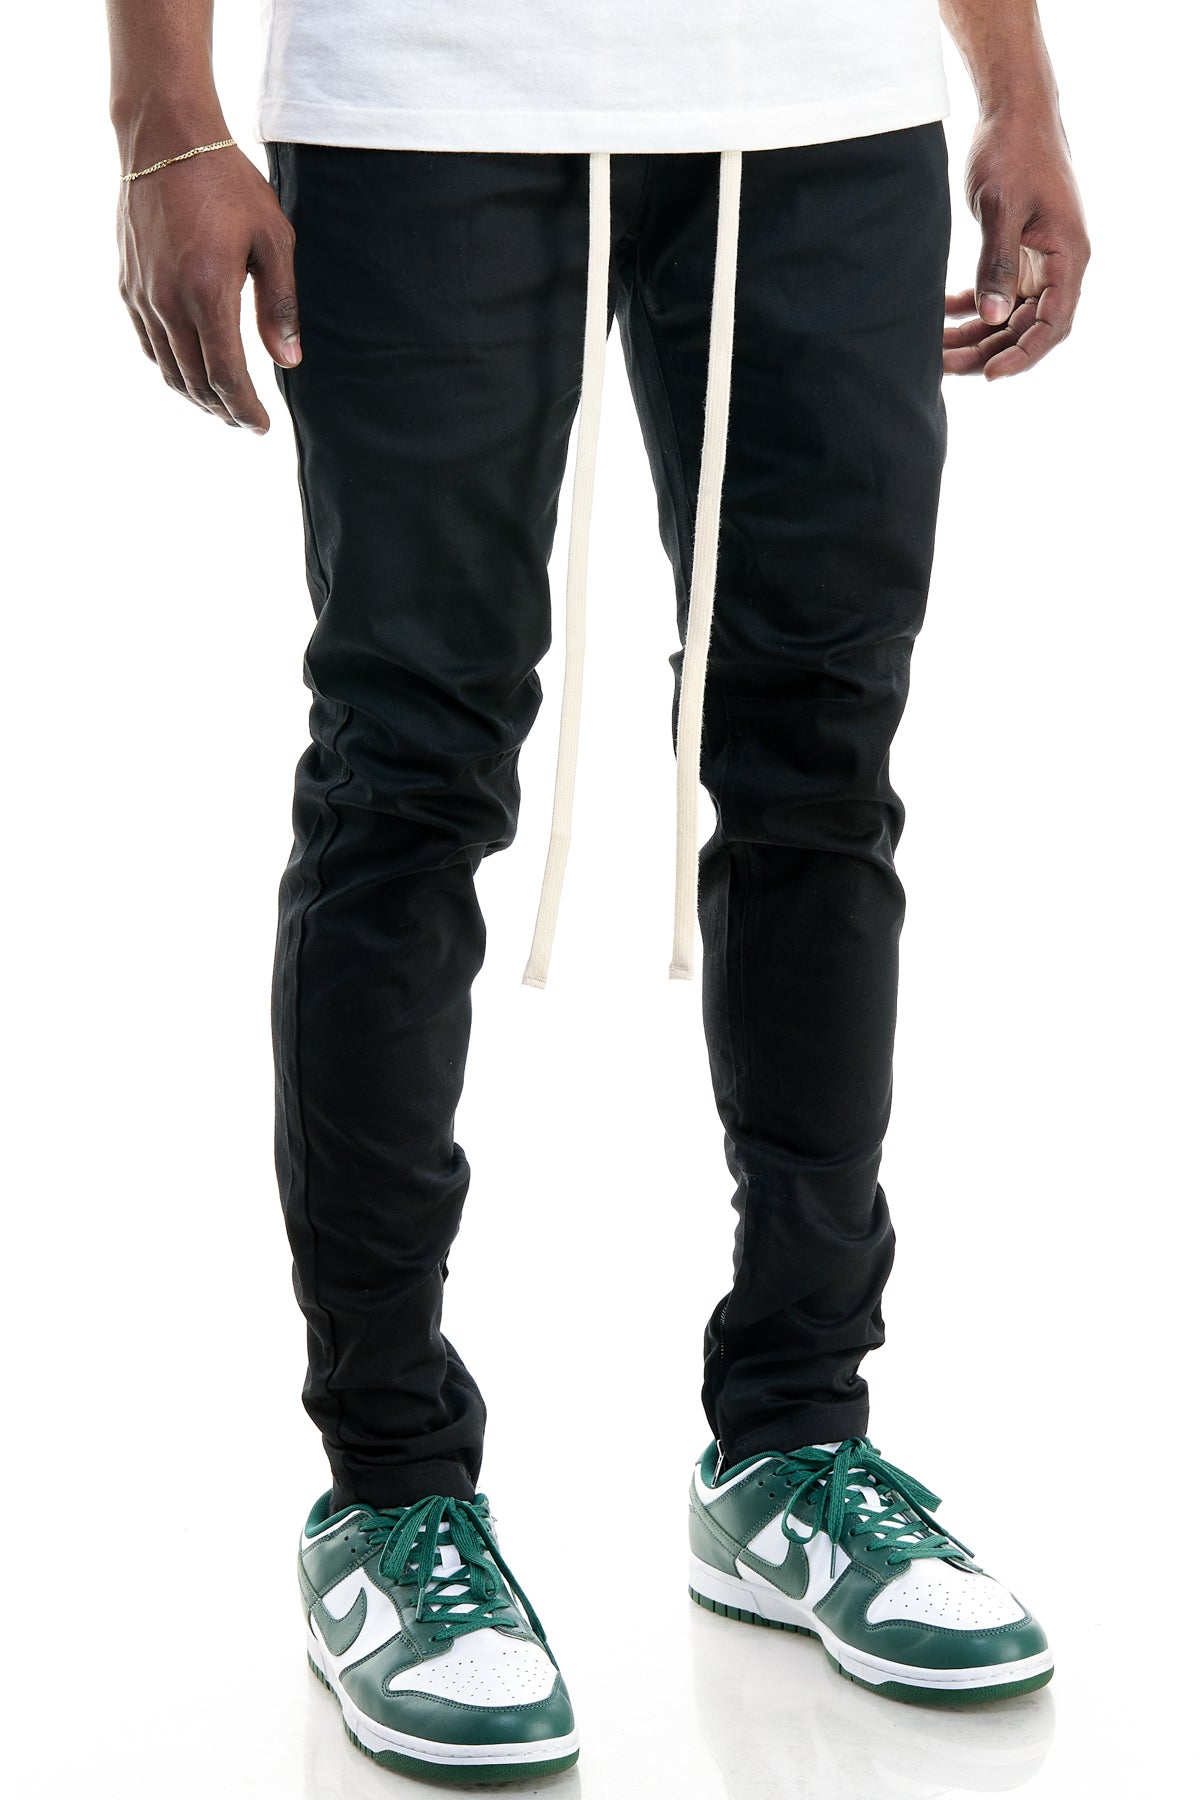 Asics entry zip cuff track pants + FREE SHIPPING | Zappos.com